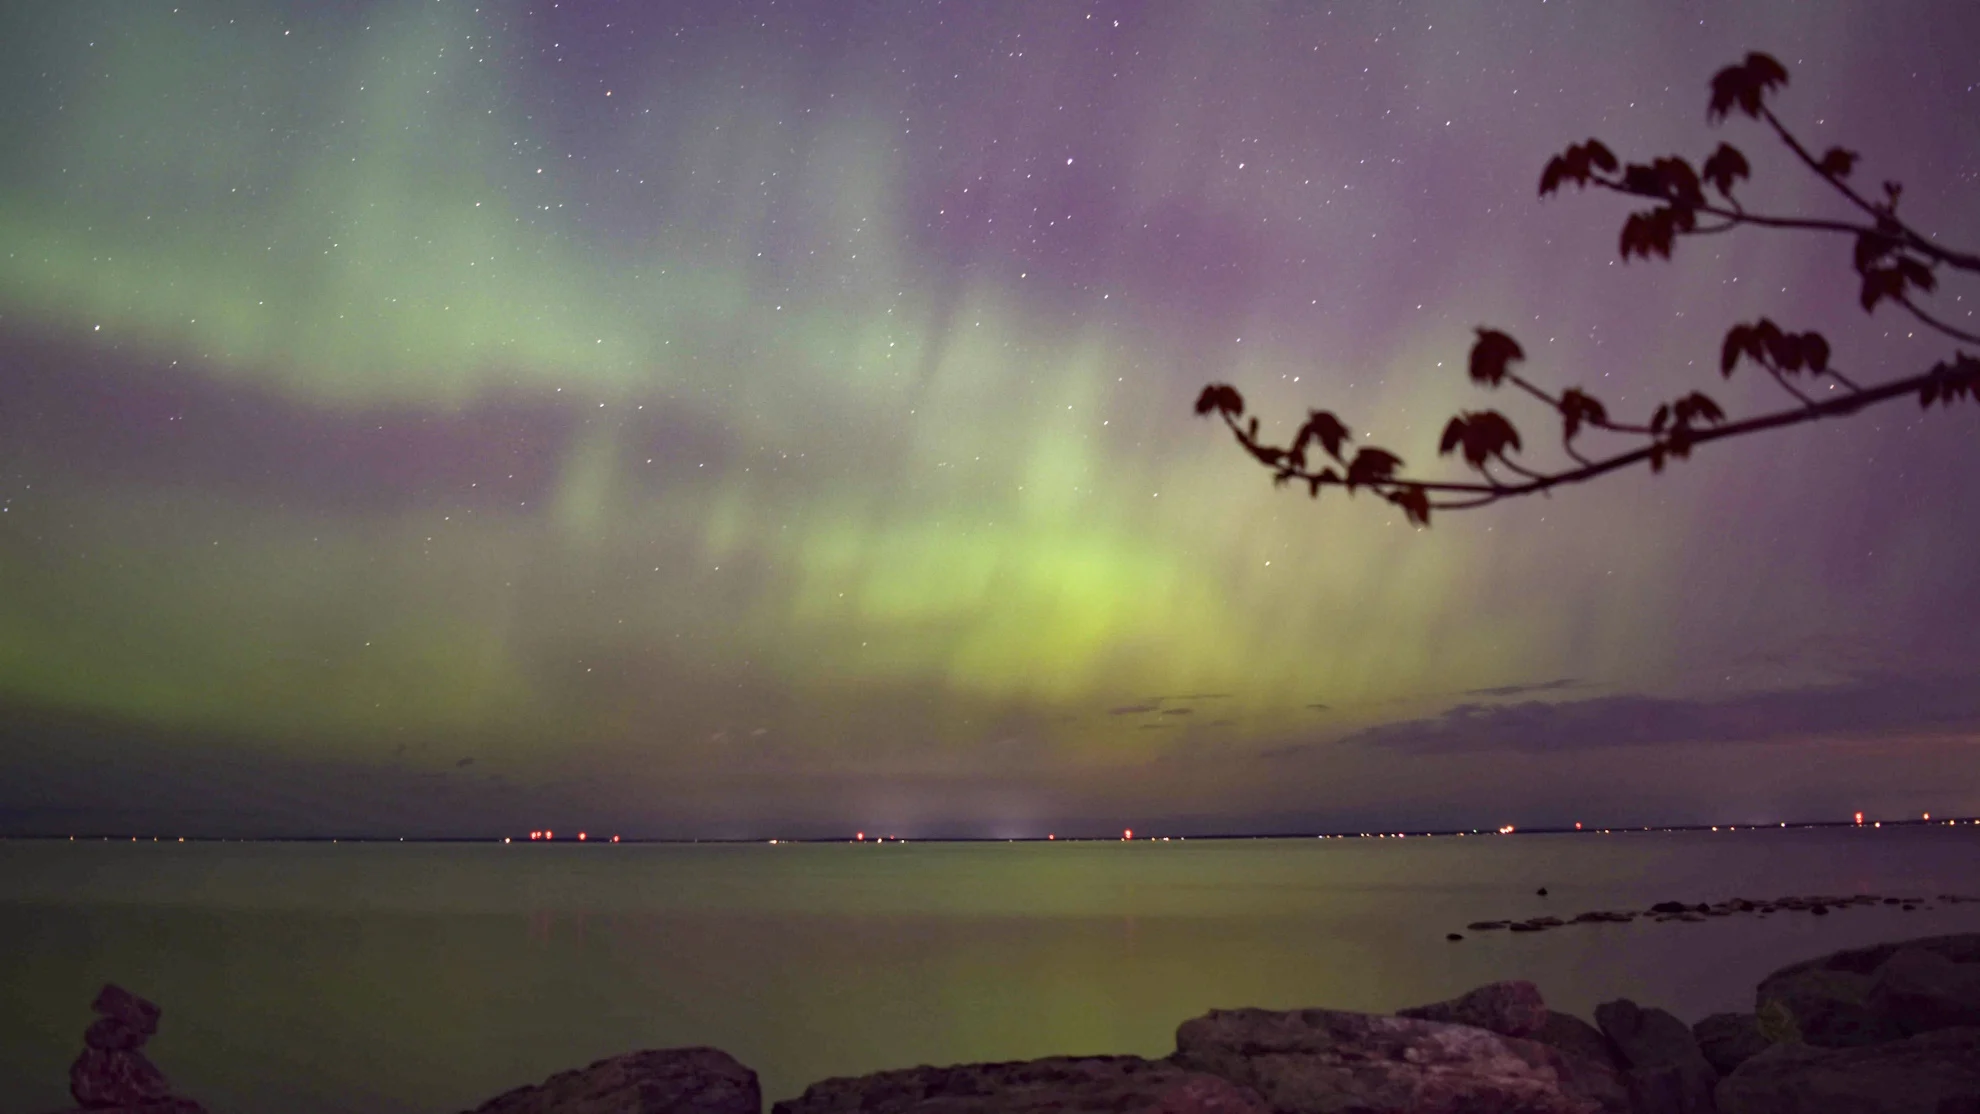 Parts of Ontario could see widespread auroras again Saturday night as an intense solar storm continues this weekend